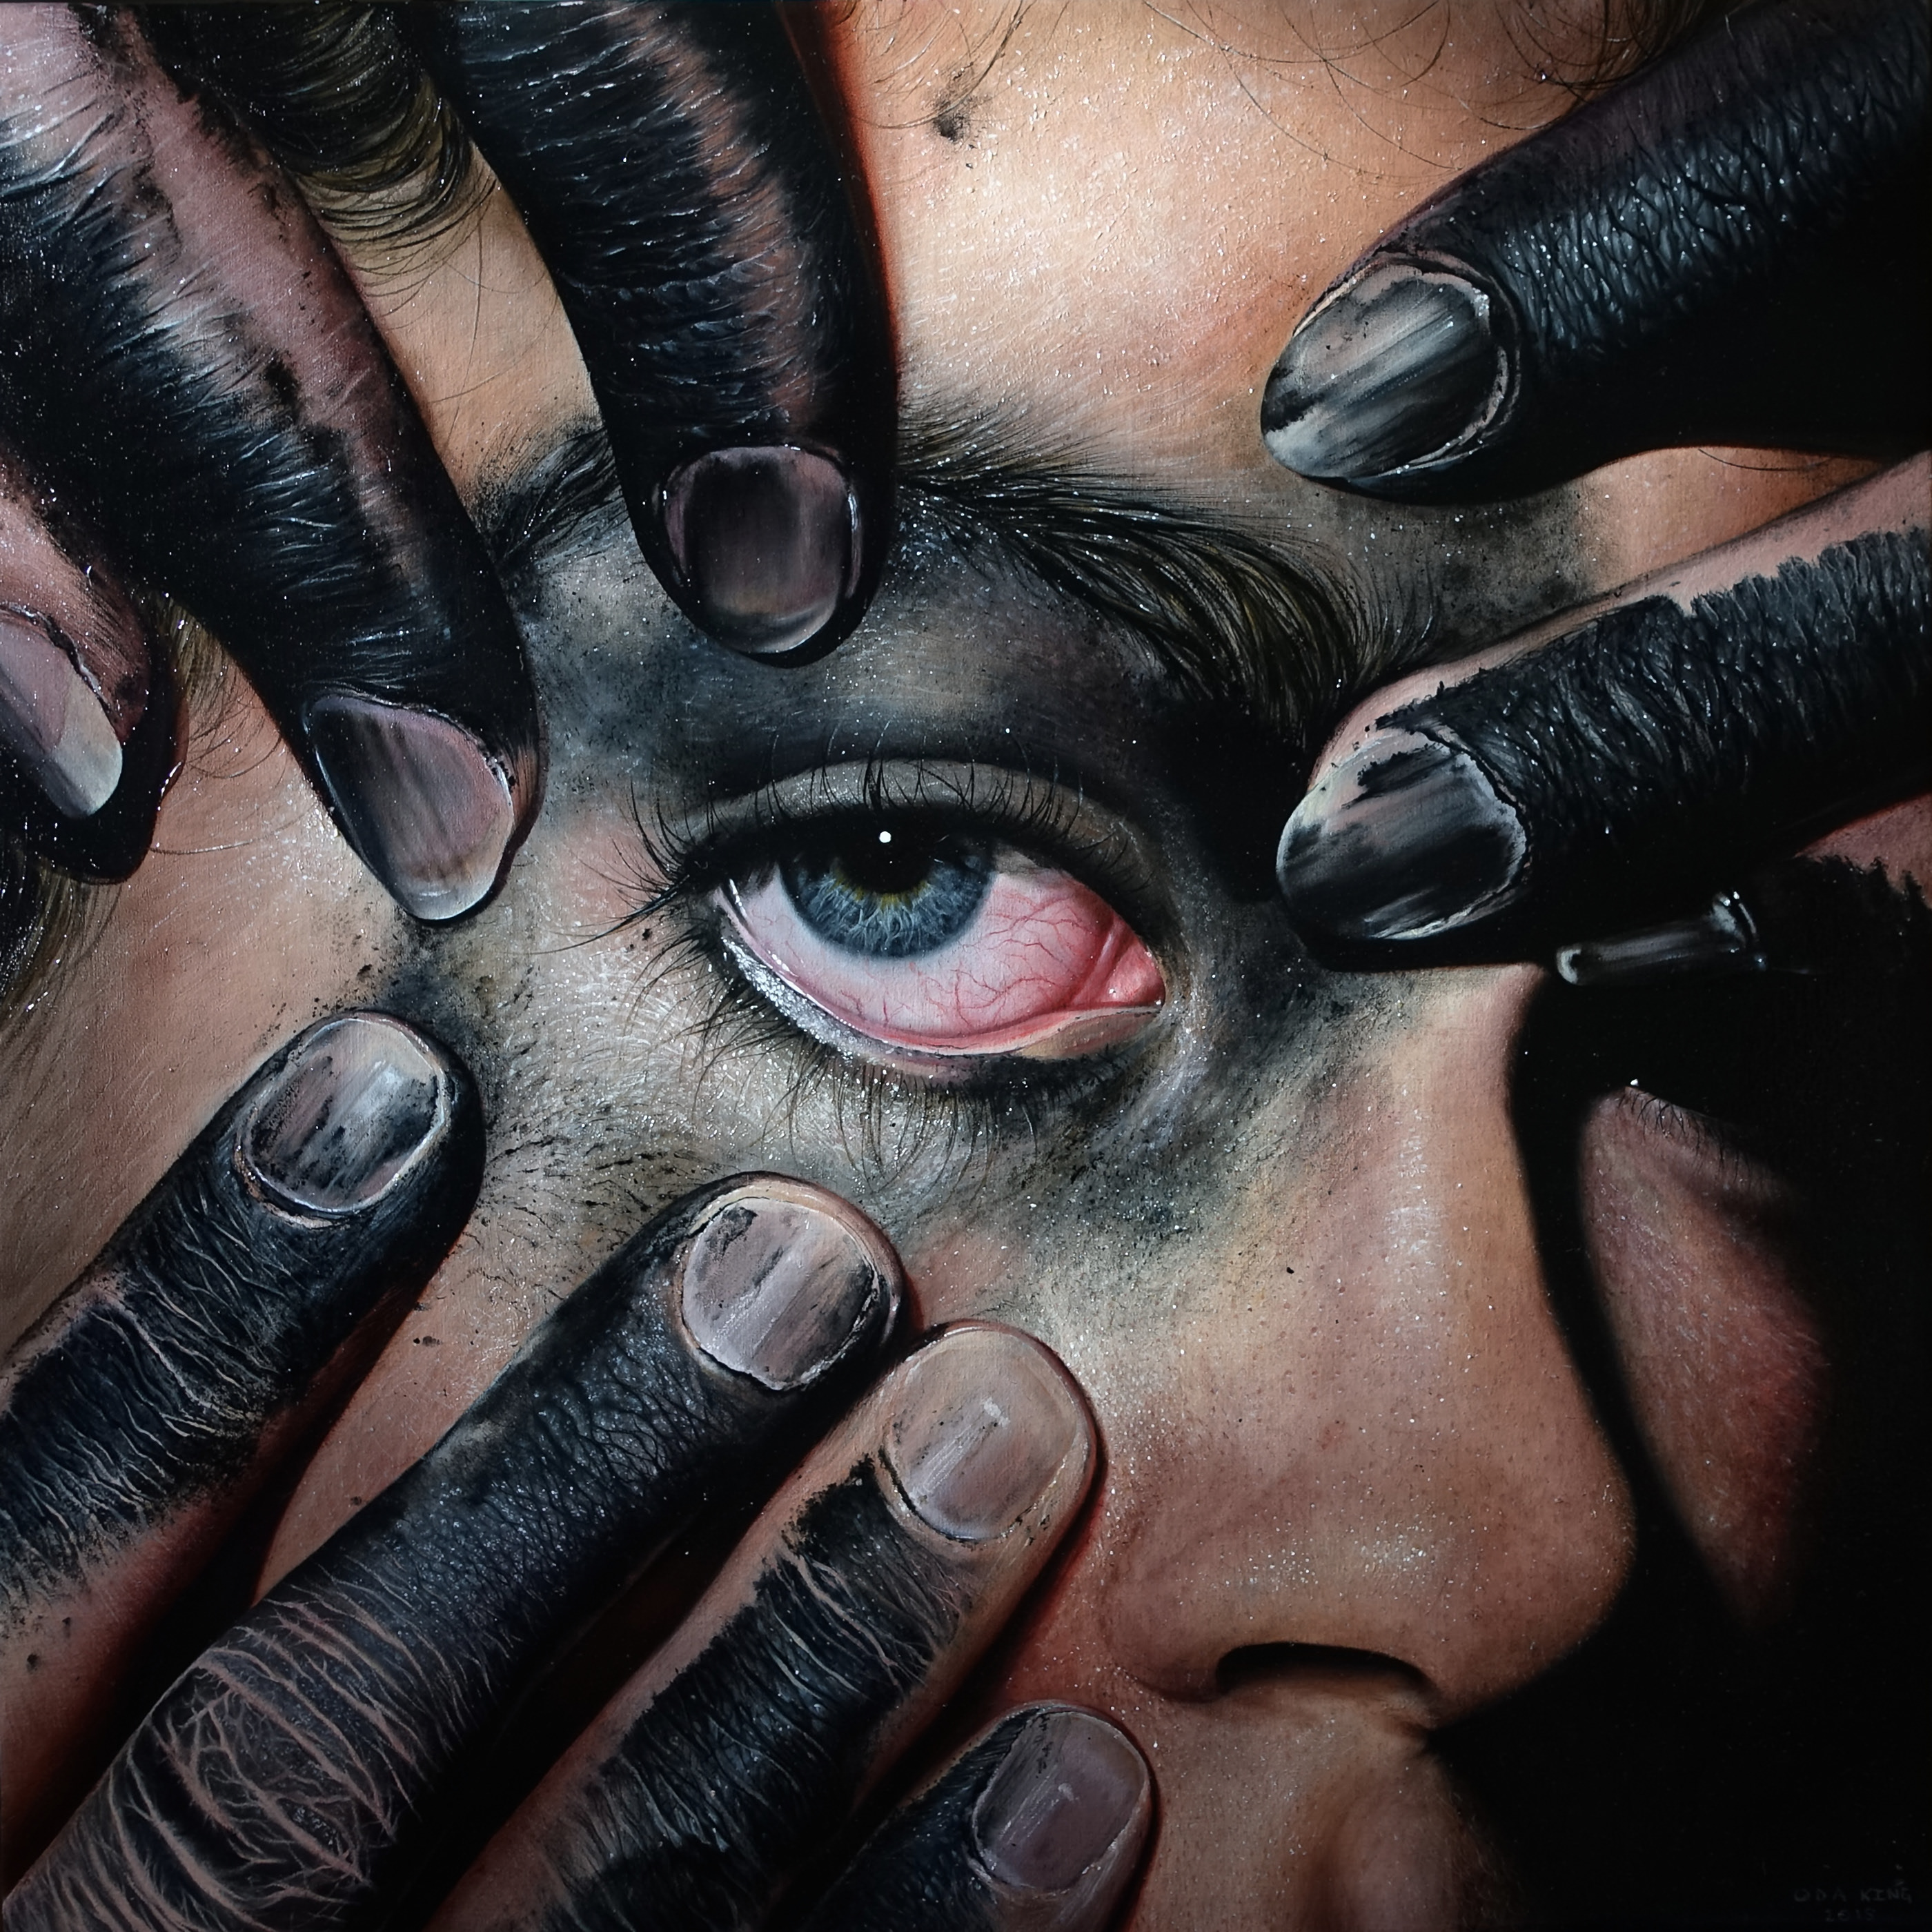 Hyperrealistic Oil Painting On Behance